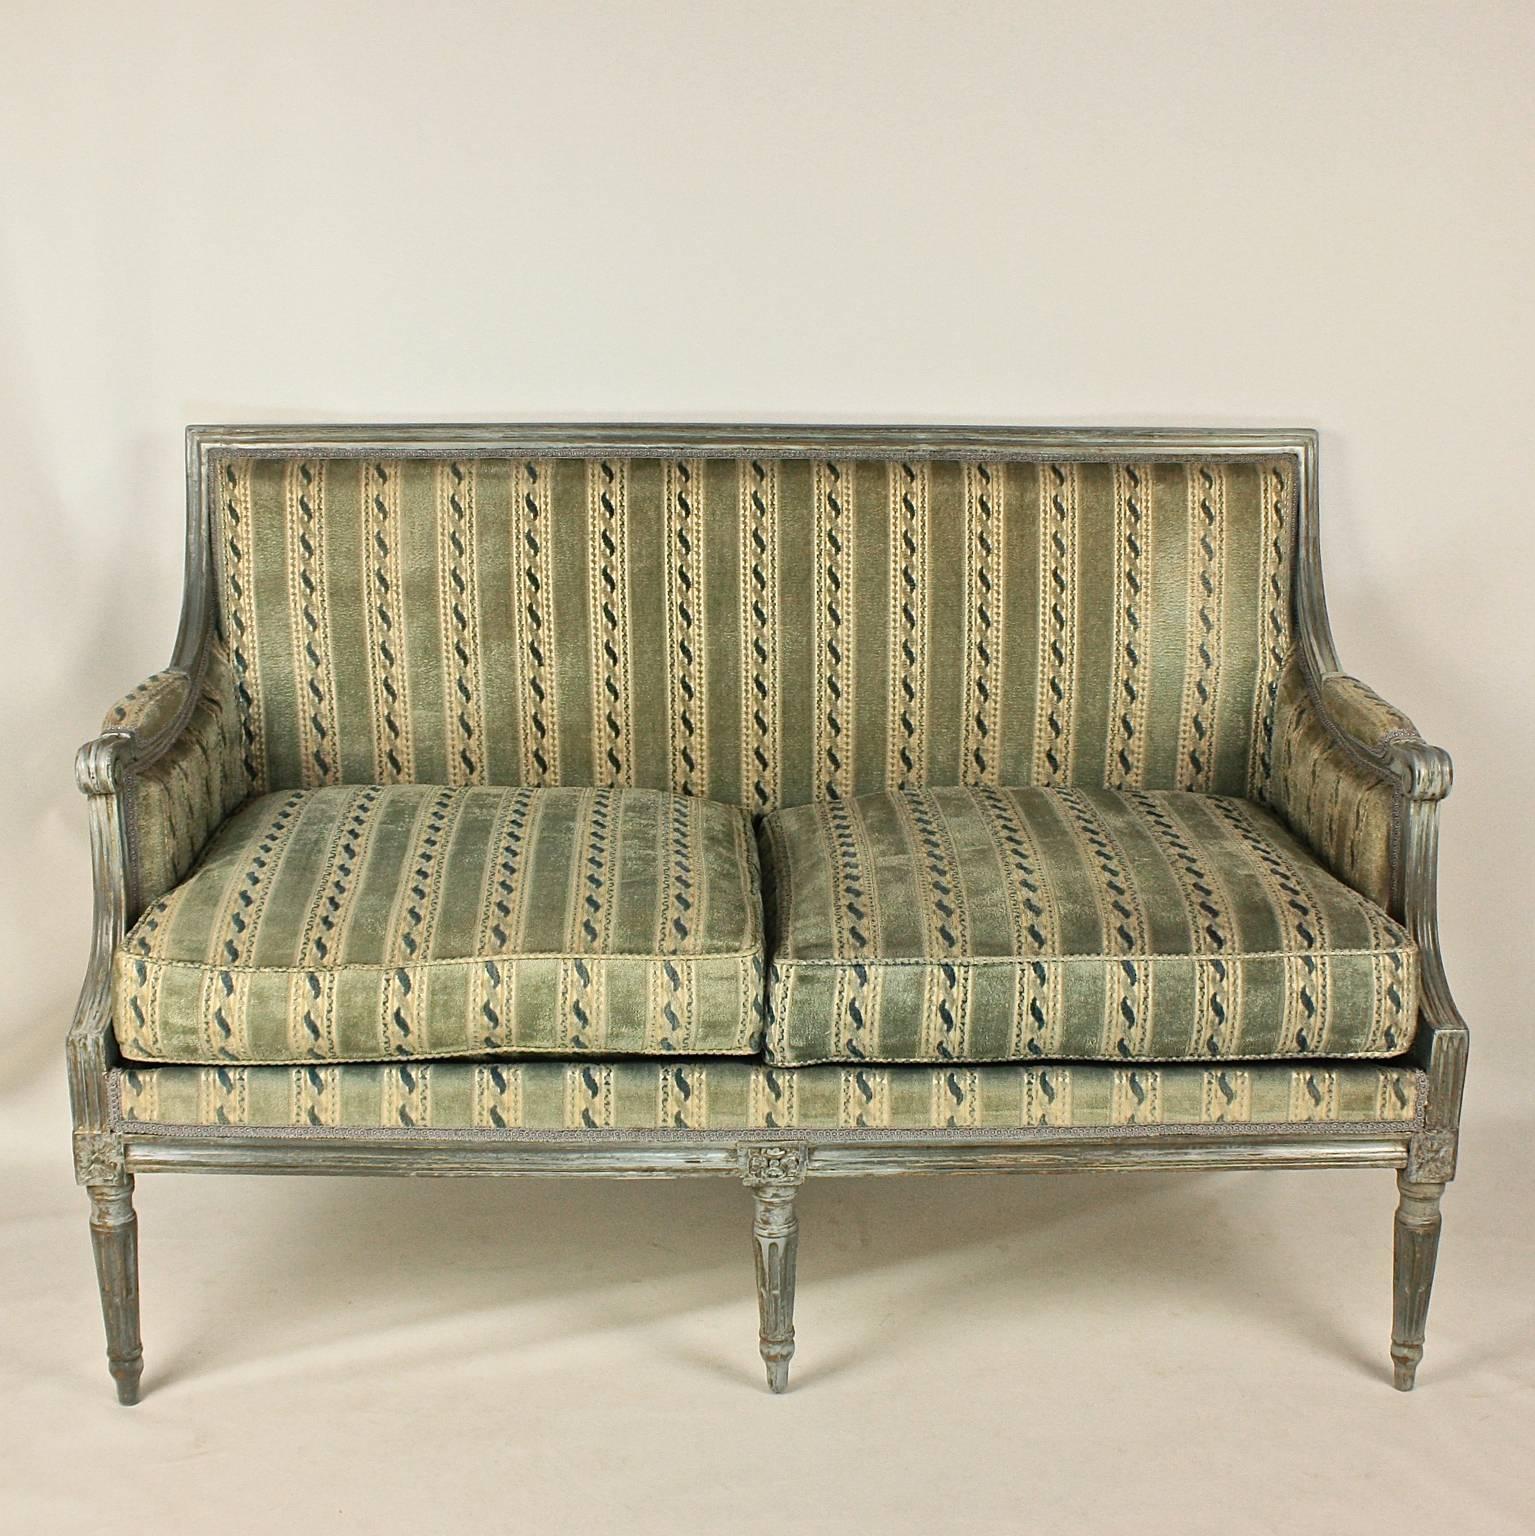 An 18th century Louis XVI blue or grey painted sofa with a rectangular padded back, the top-rail carved with plain moulding, with padded sides and scrolled supports, a double cushioned seat and each block of the seat rail headed by a patera on round